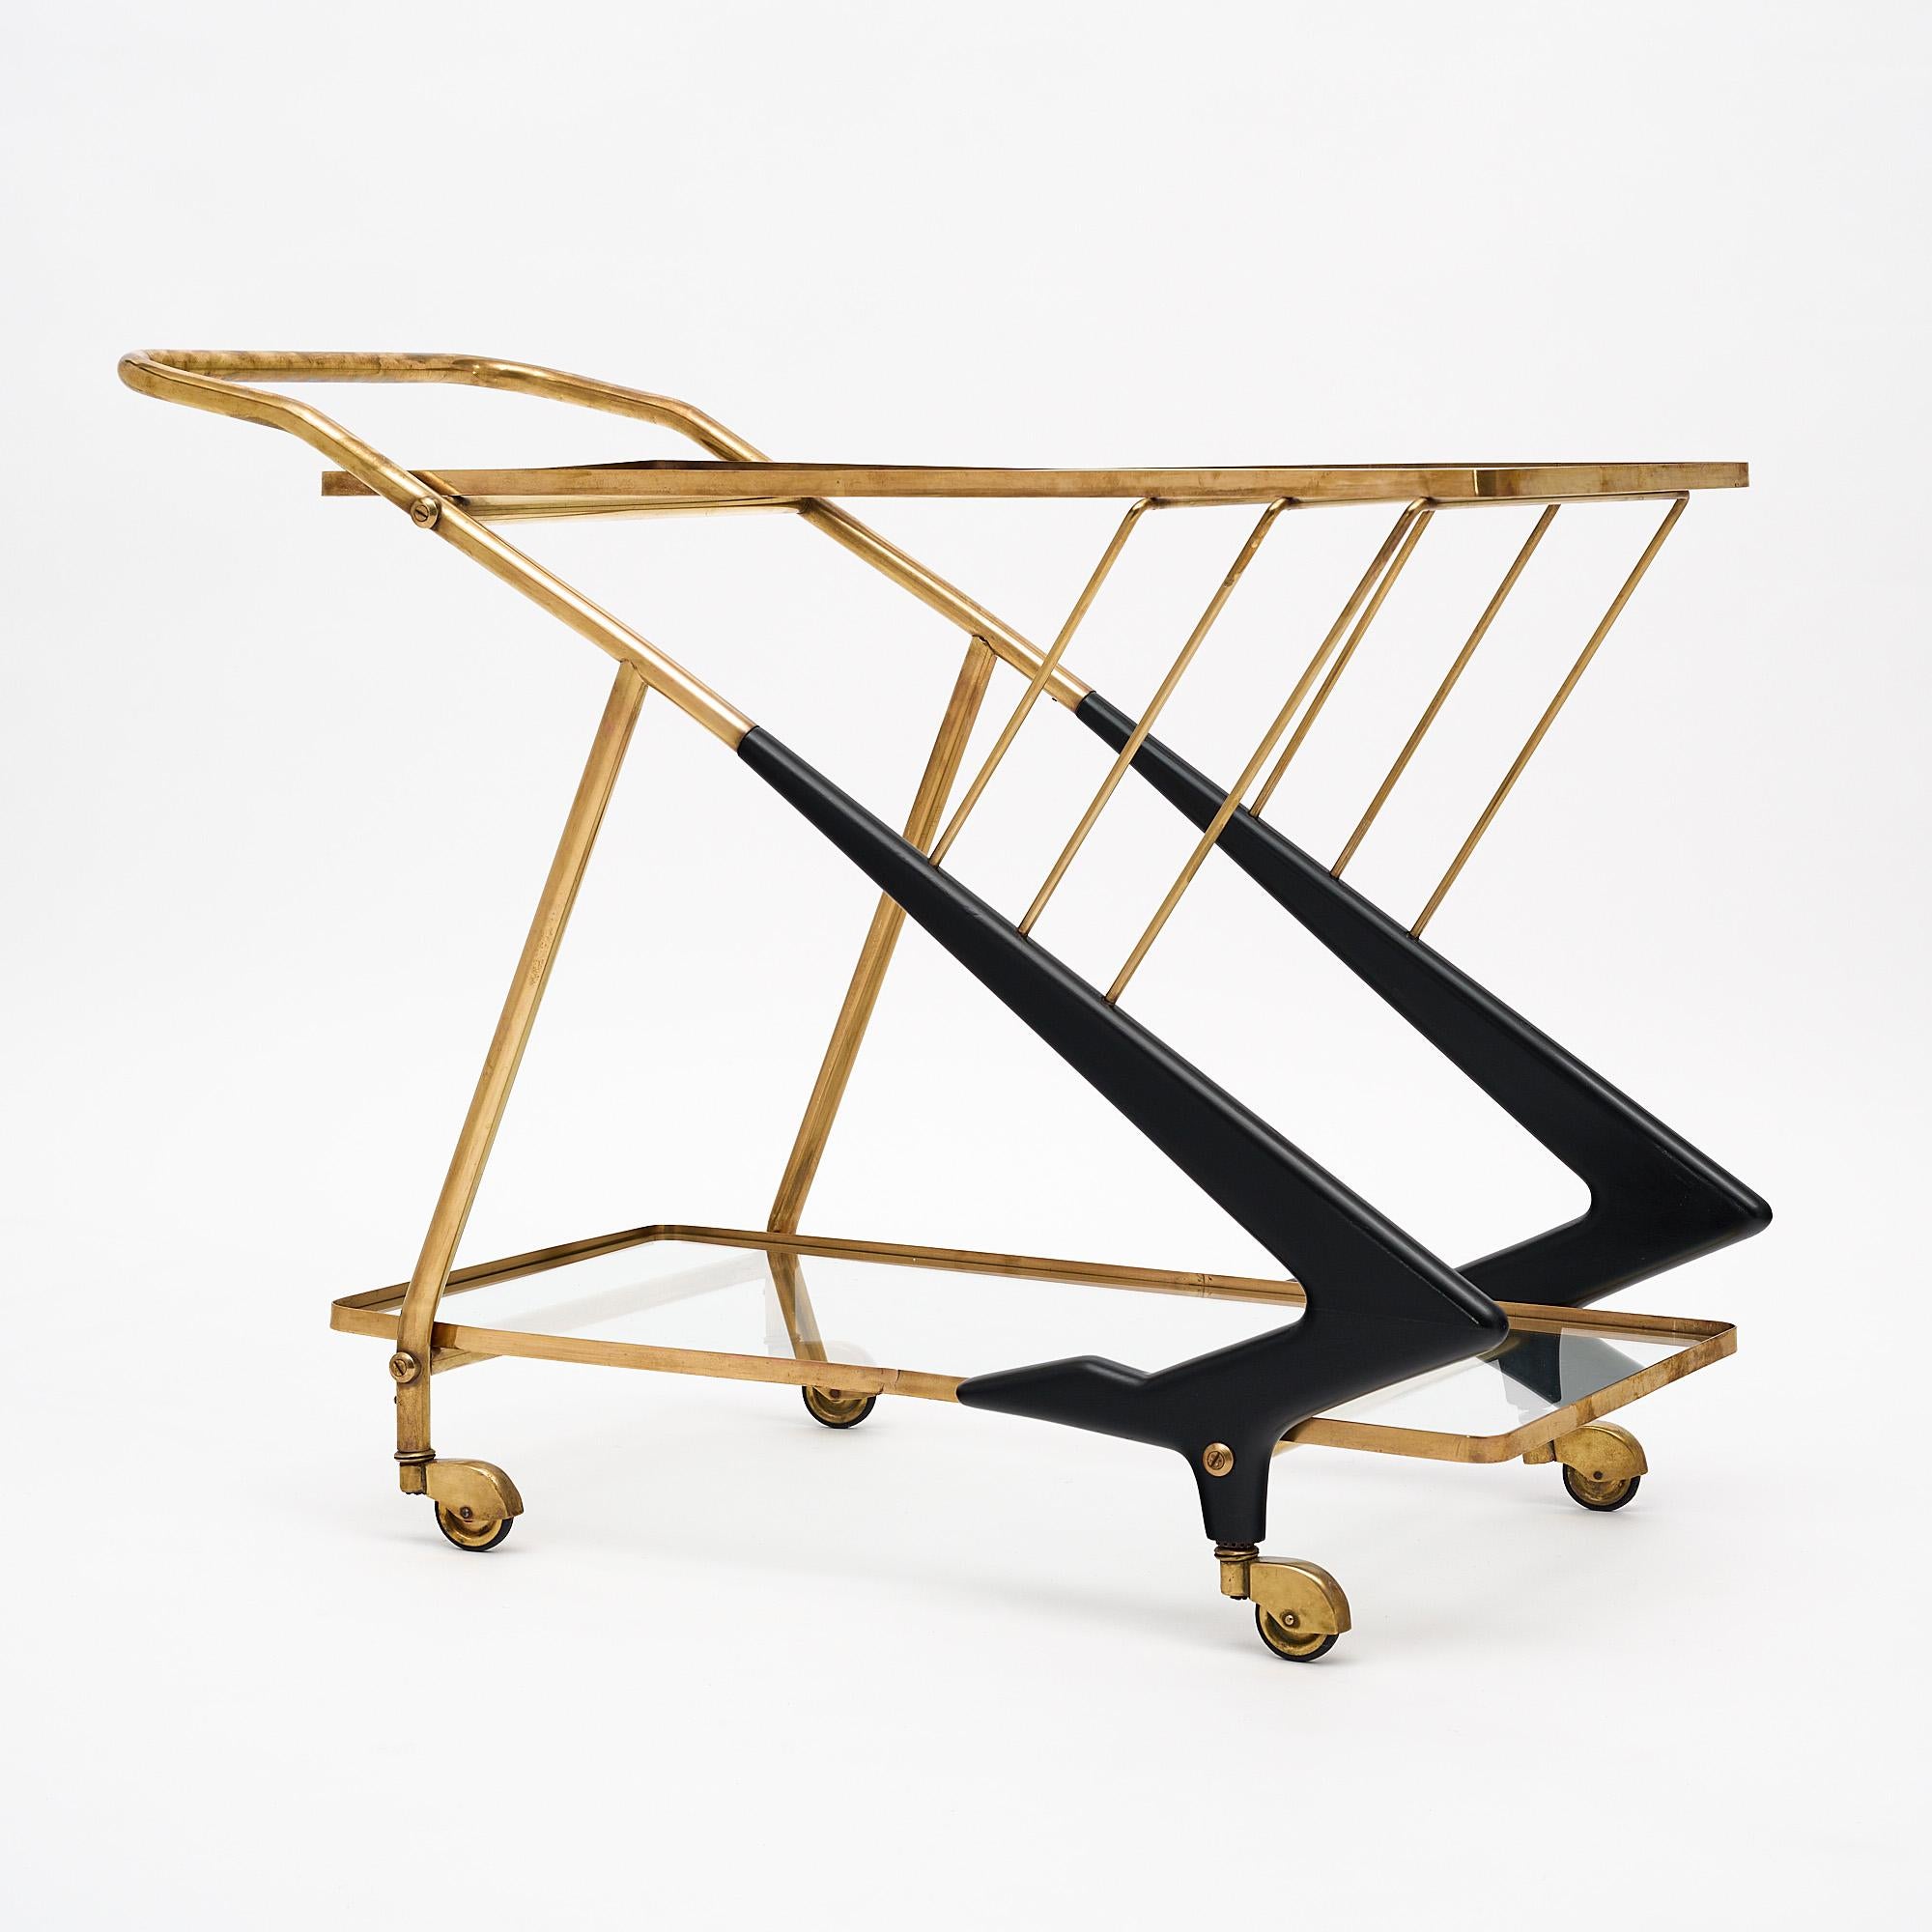 Bar cart, Italian, in a dynamic Mid-Century Modern style, by iconic designer Cesare Lacca. The ebonized wood and solid brass structure features two glass shelves and sits on four original casters.